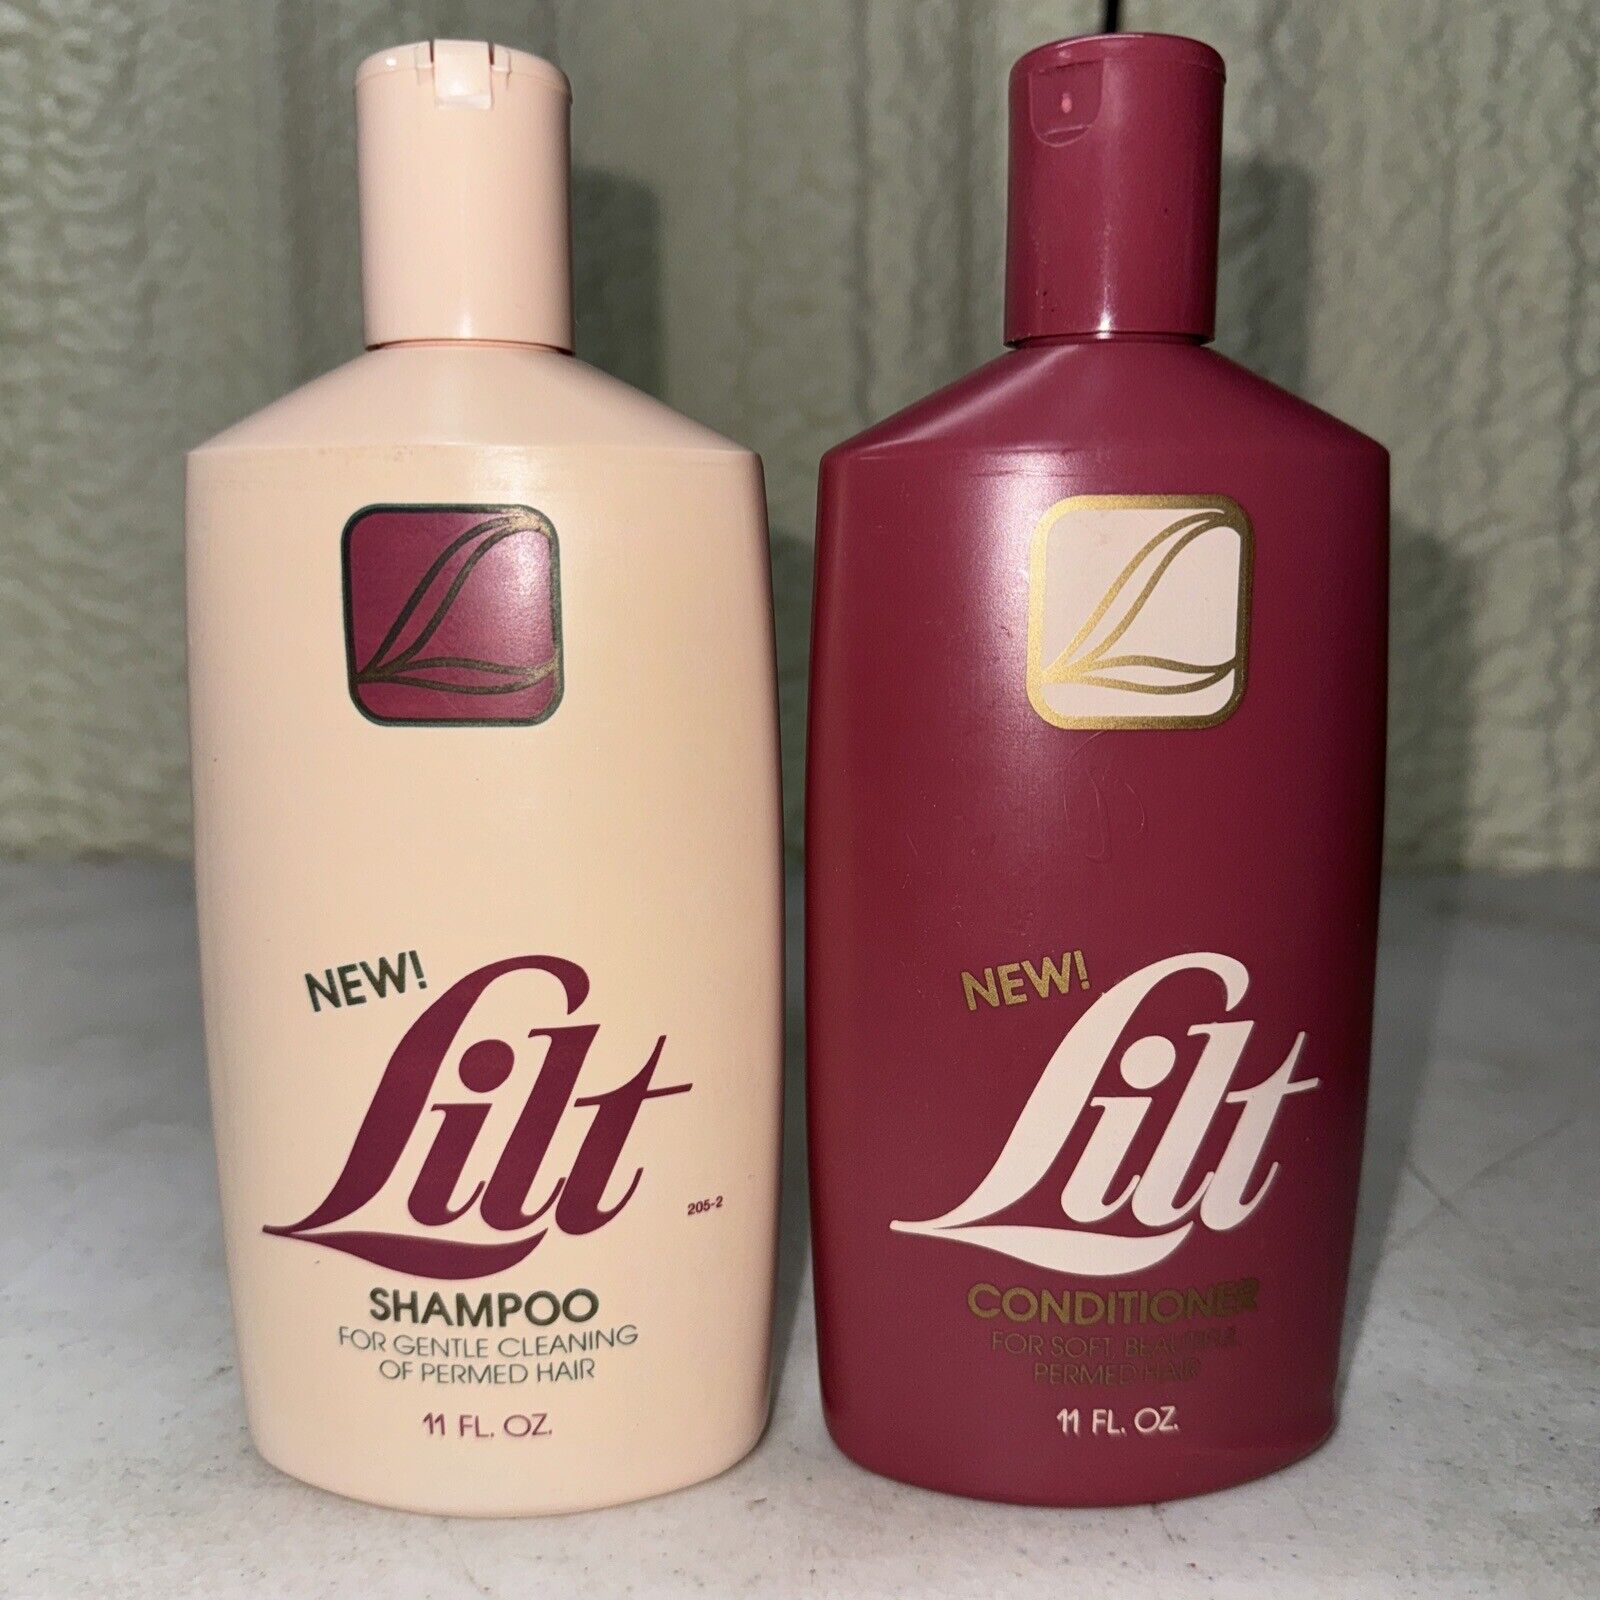 Vintage 1985 P&G Lilt Shampoo & Conditioner for Permed Hair 11 oz new